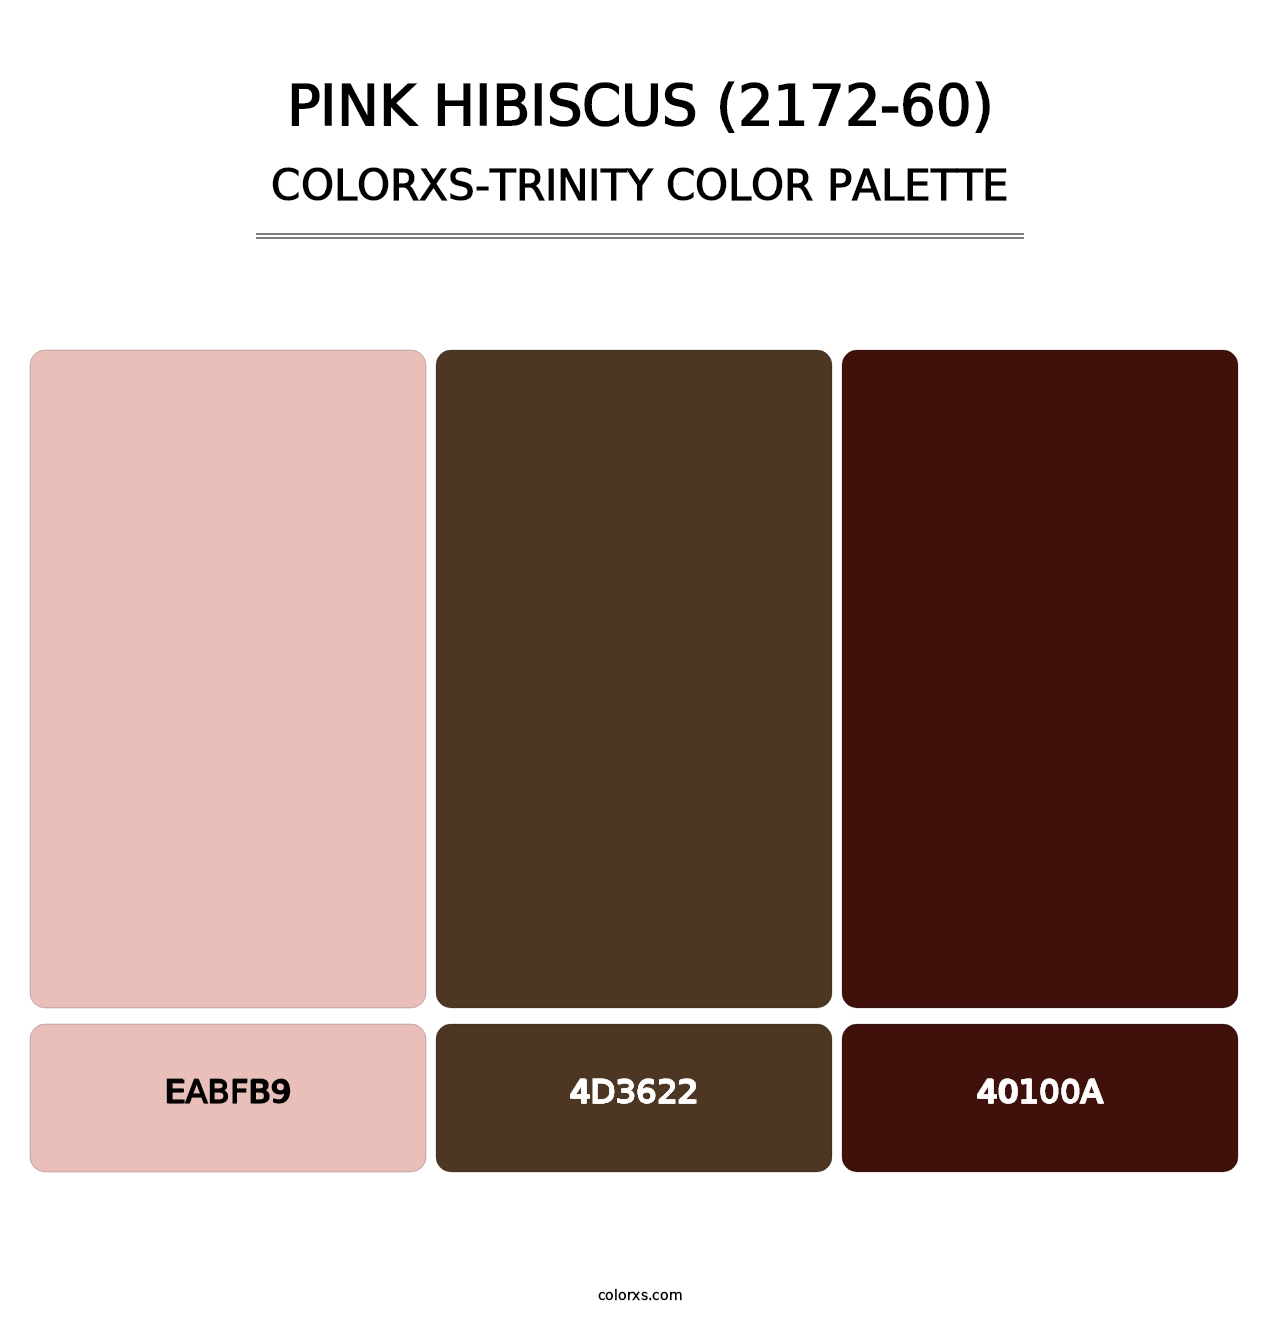 Pink Hibiscus (2172-60) - Colorxs Trinity Palette